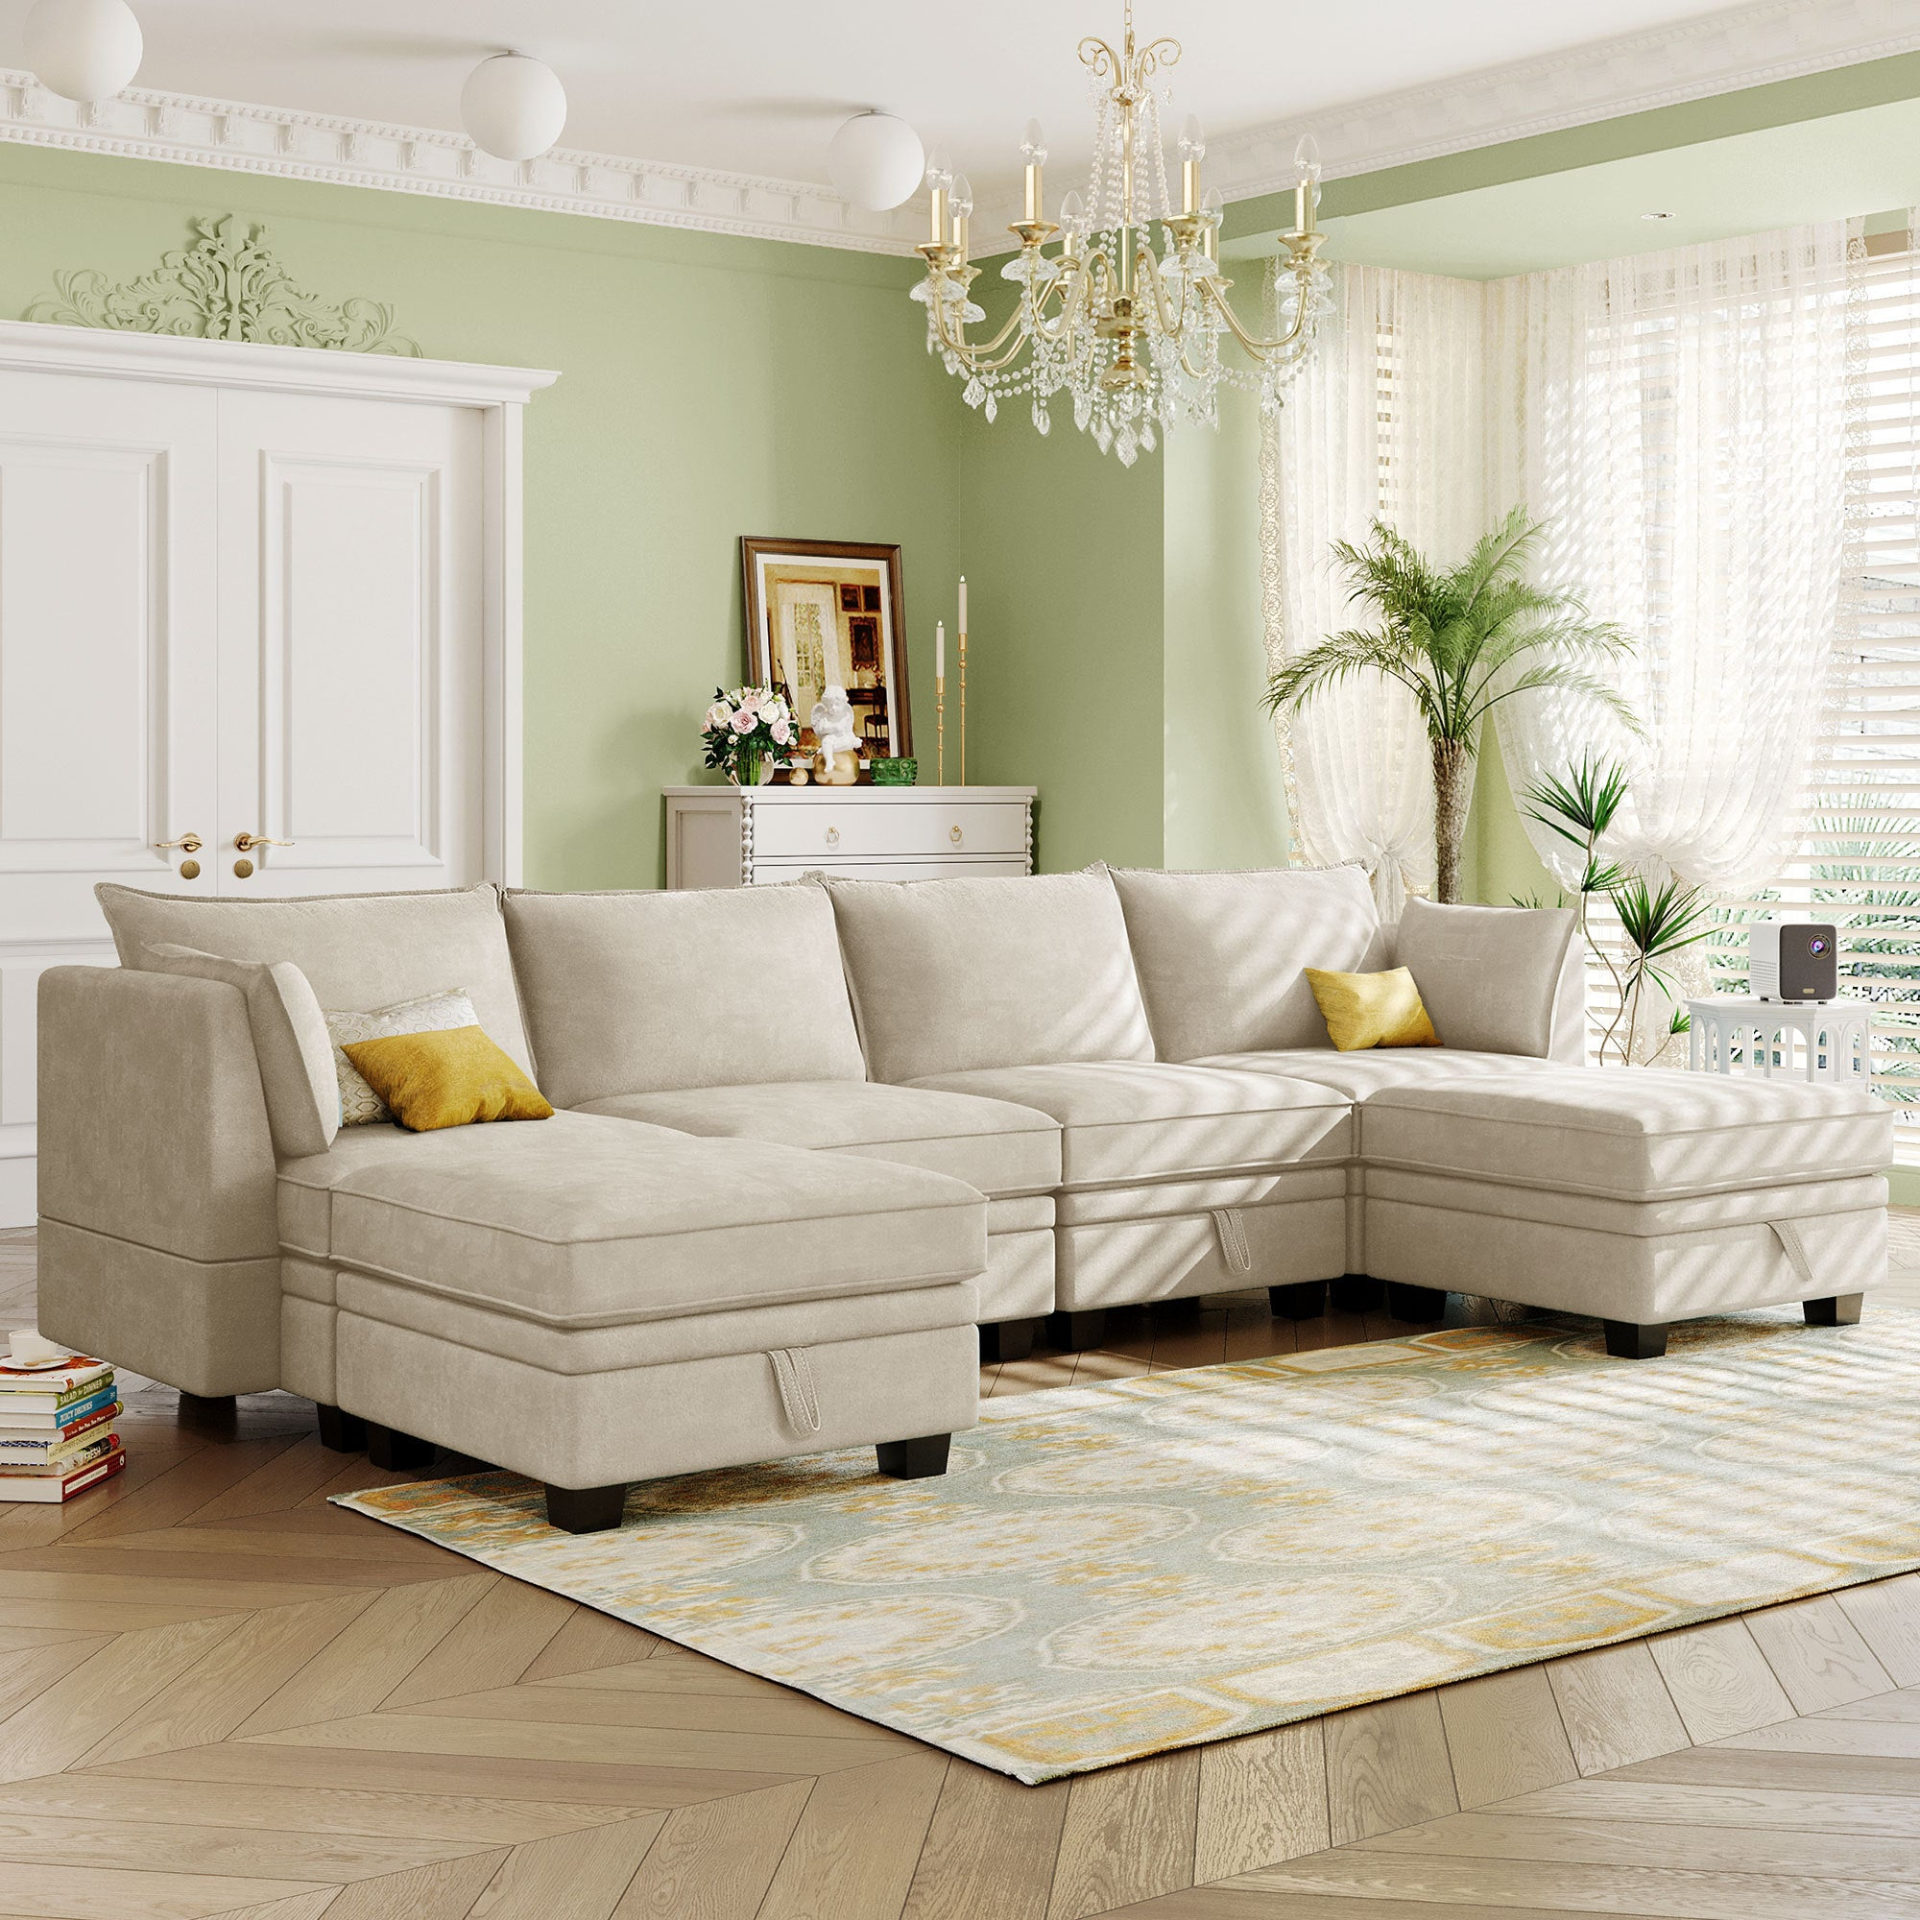 Beige - Contemporary U-Shape Sectional: Convertible Sofa Bed With Reversible Chaise & Storage